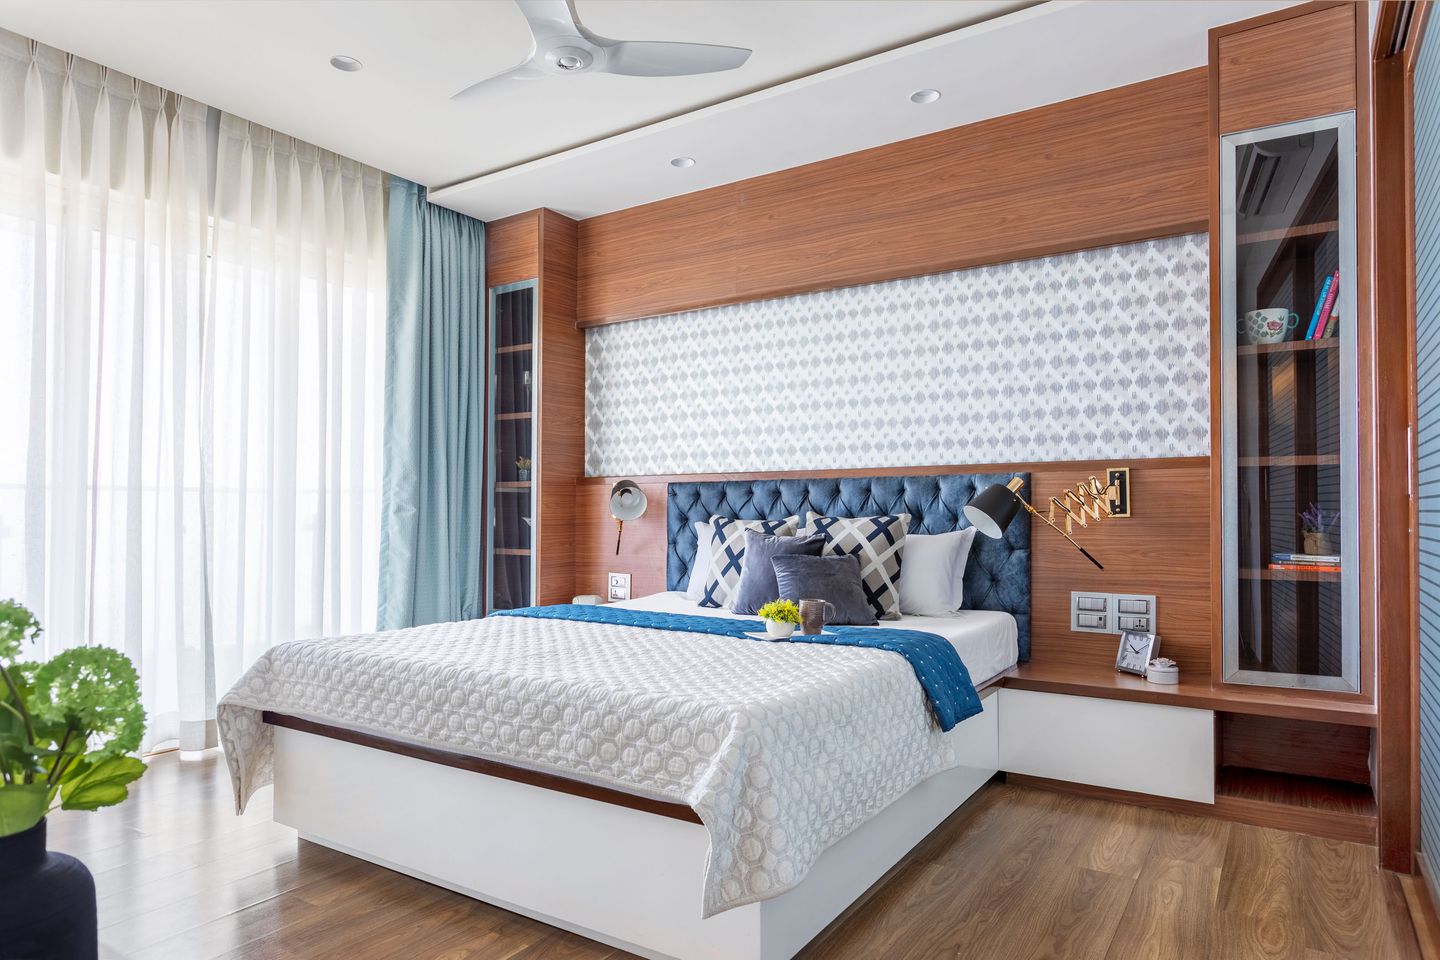 Bedroom Design With Wooden Interiors And Bed With Blue Headboard - Livspace